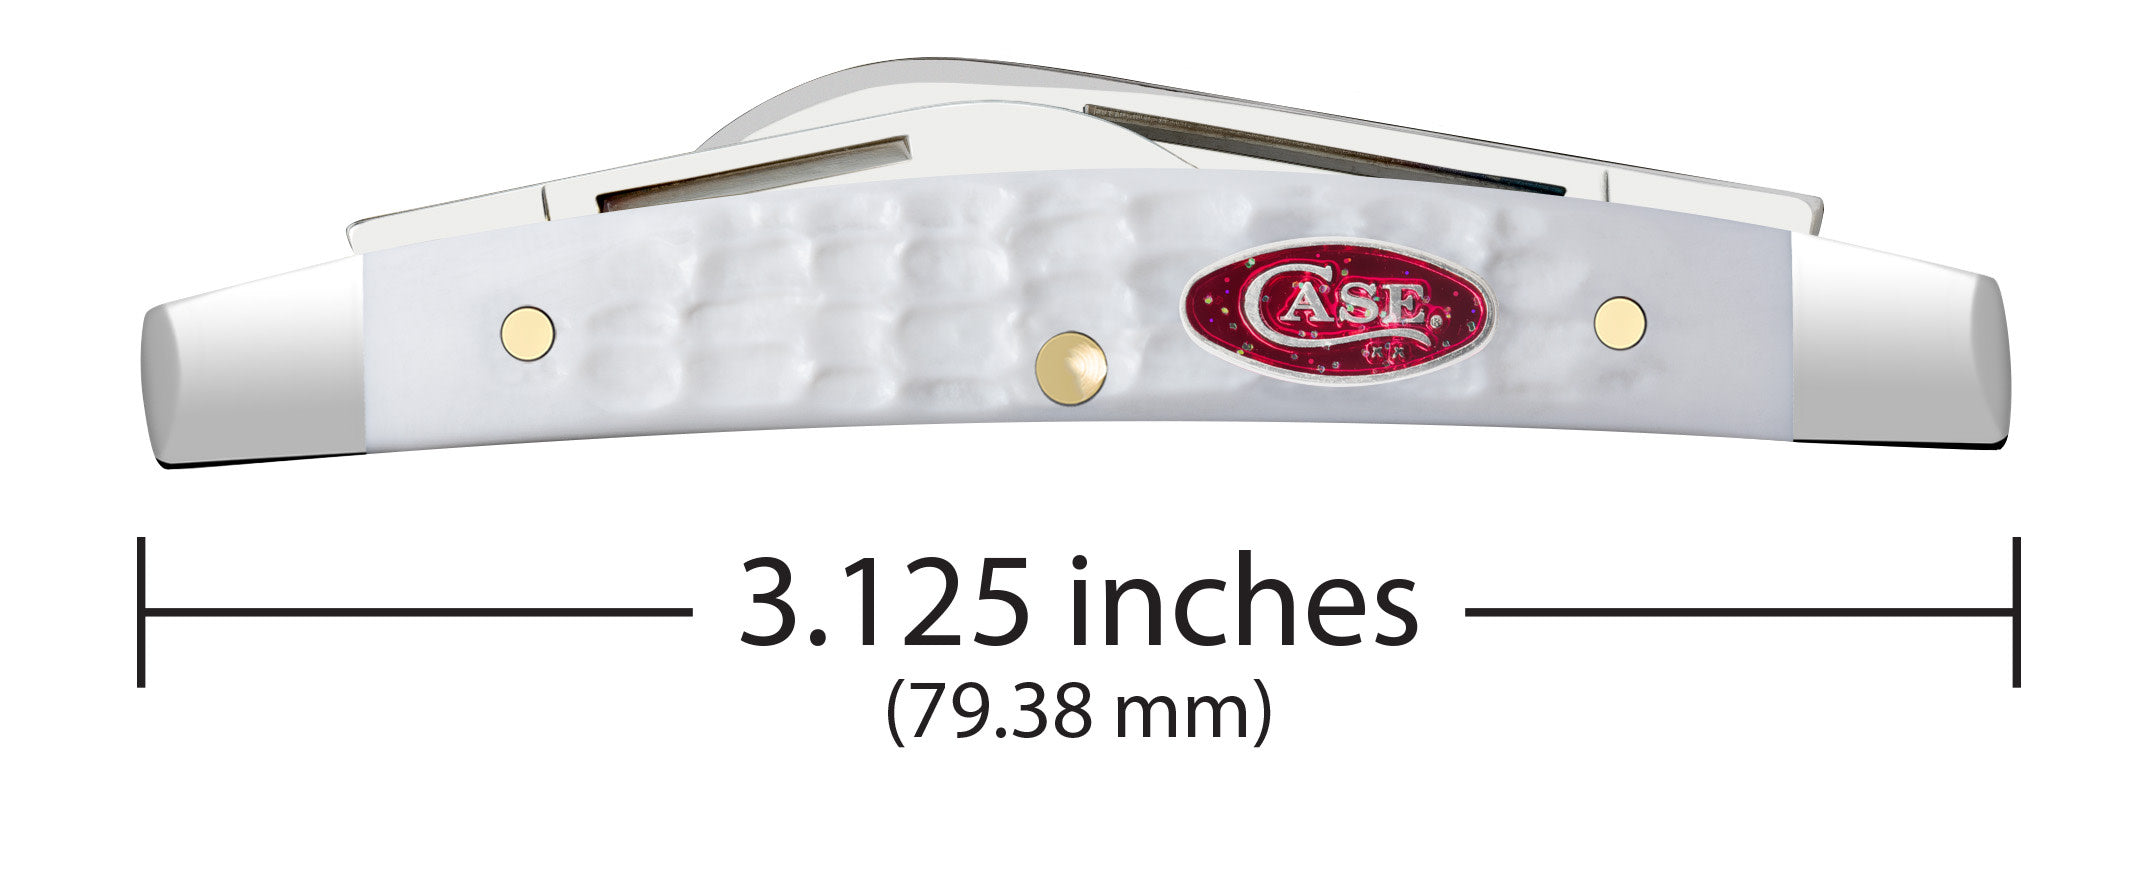 Standard Jig White Synthetic Small Congress Knife Dimensions